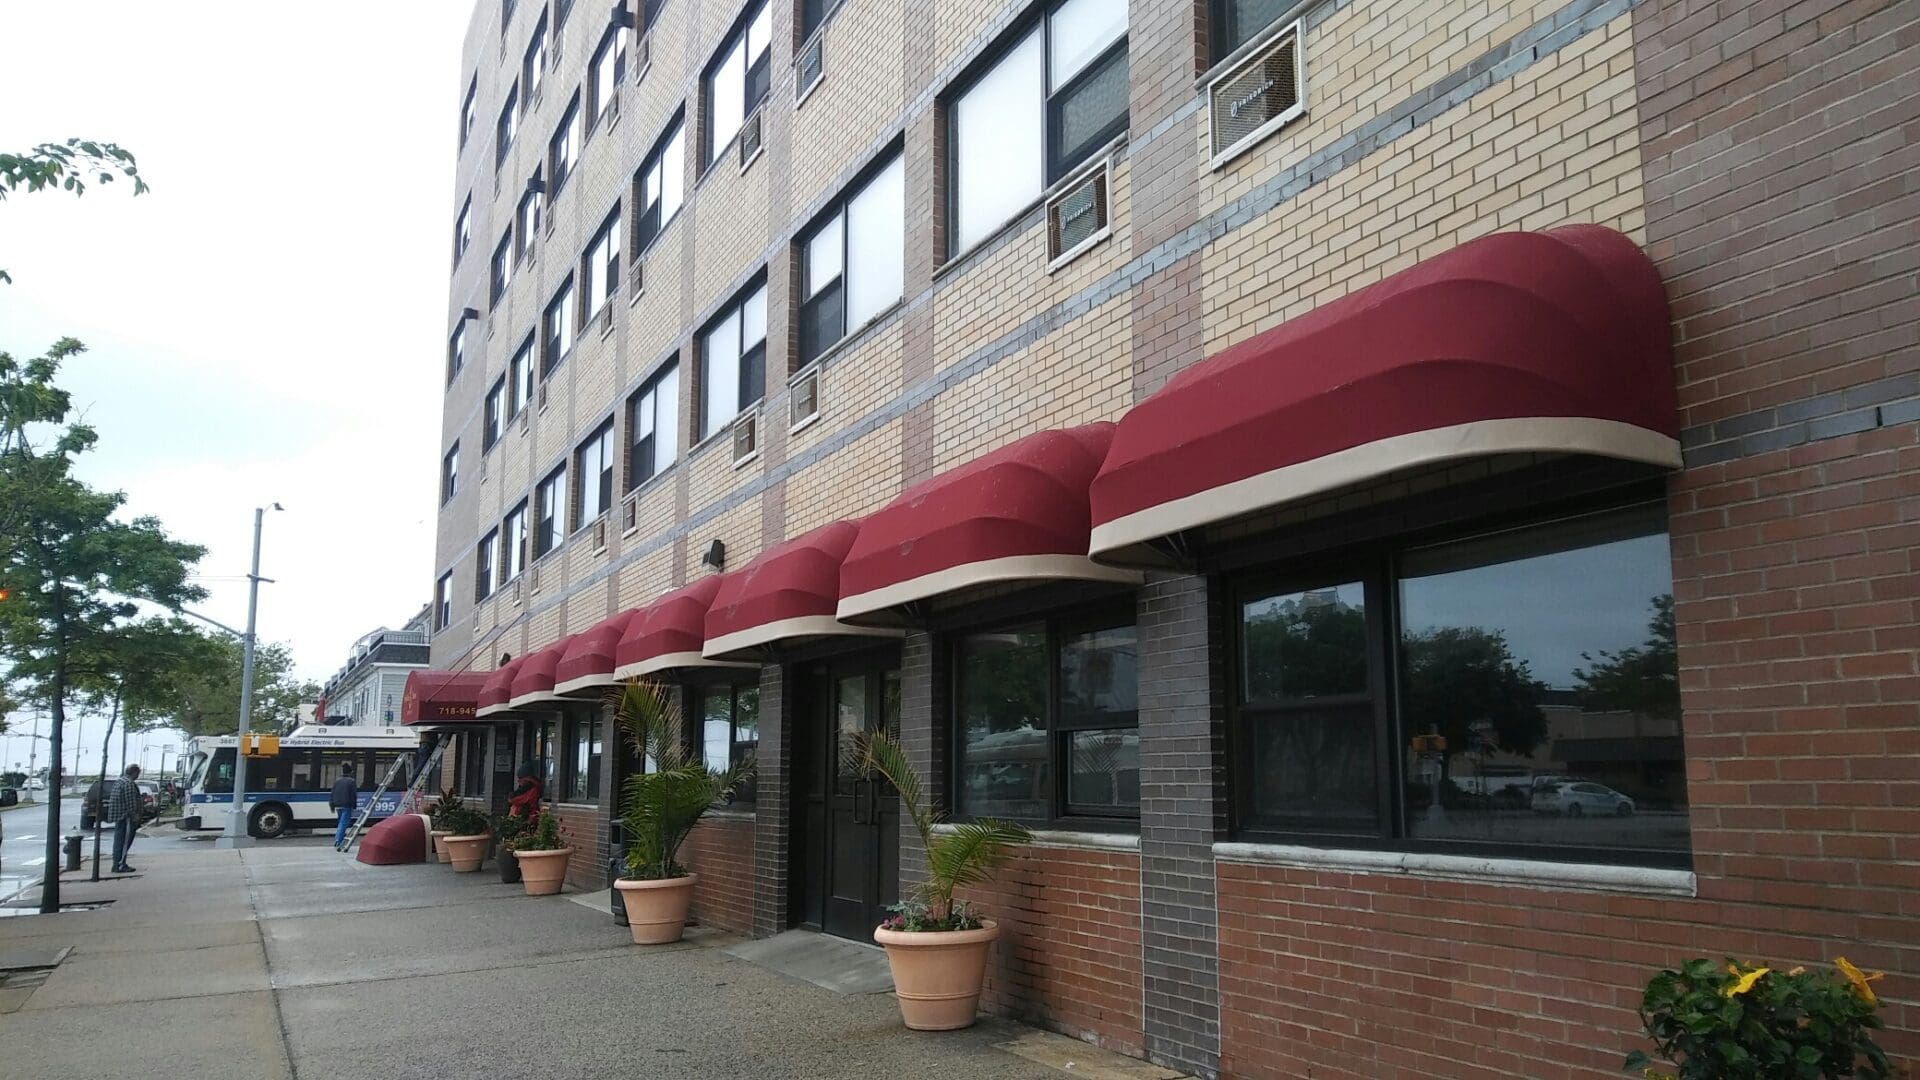 Brown brick building with red awnings over windows and doorway, lined with potted plants on a cloudy day, serving as the ADP USA Solutions Gallery.